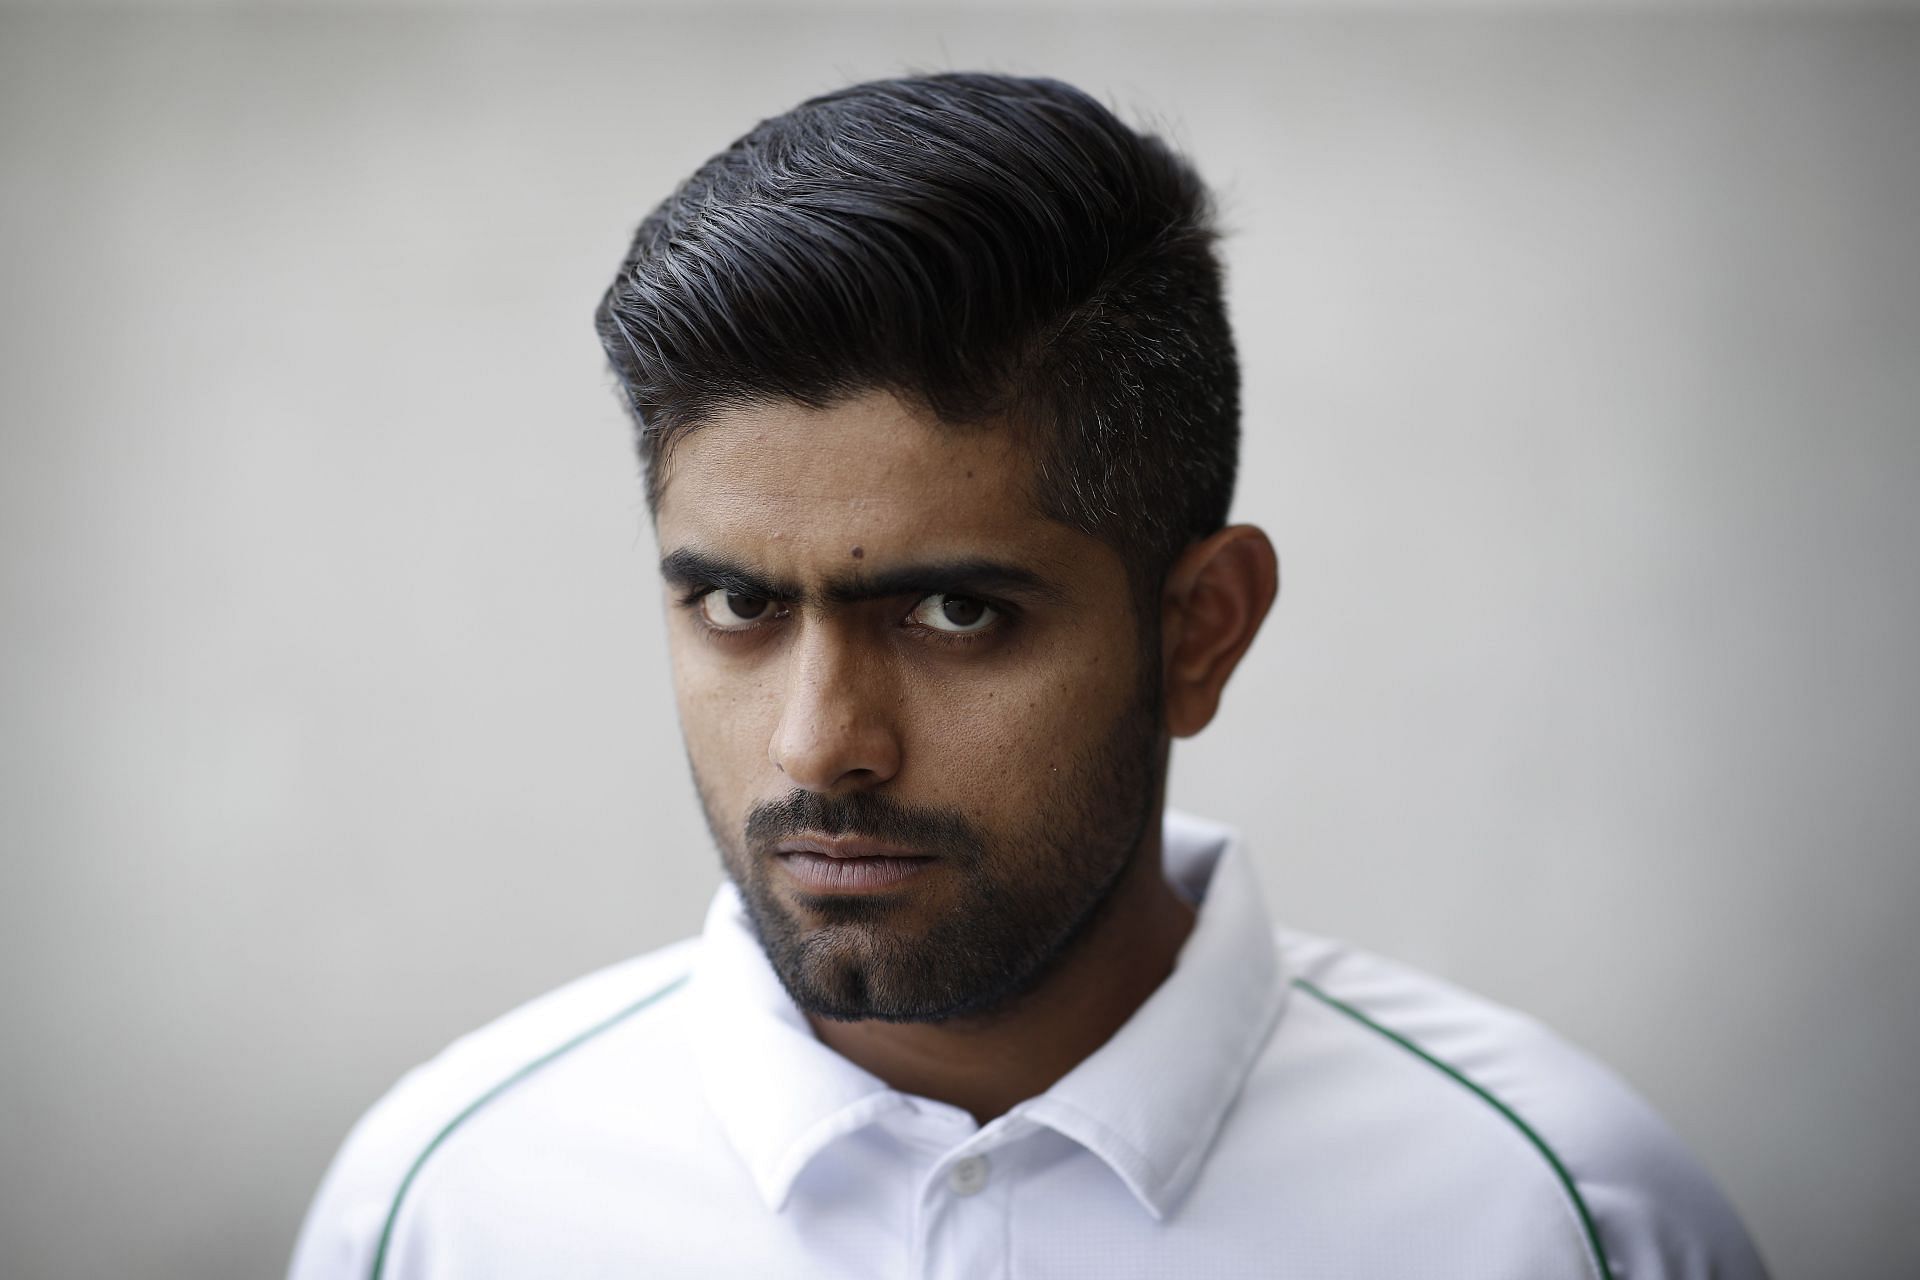 Babar Azam failed to get going in the T20I series between Pakistan and Bangladesh